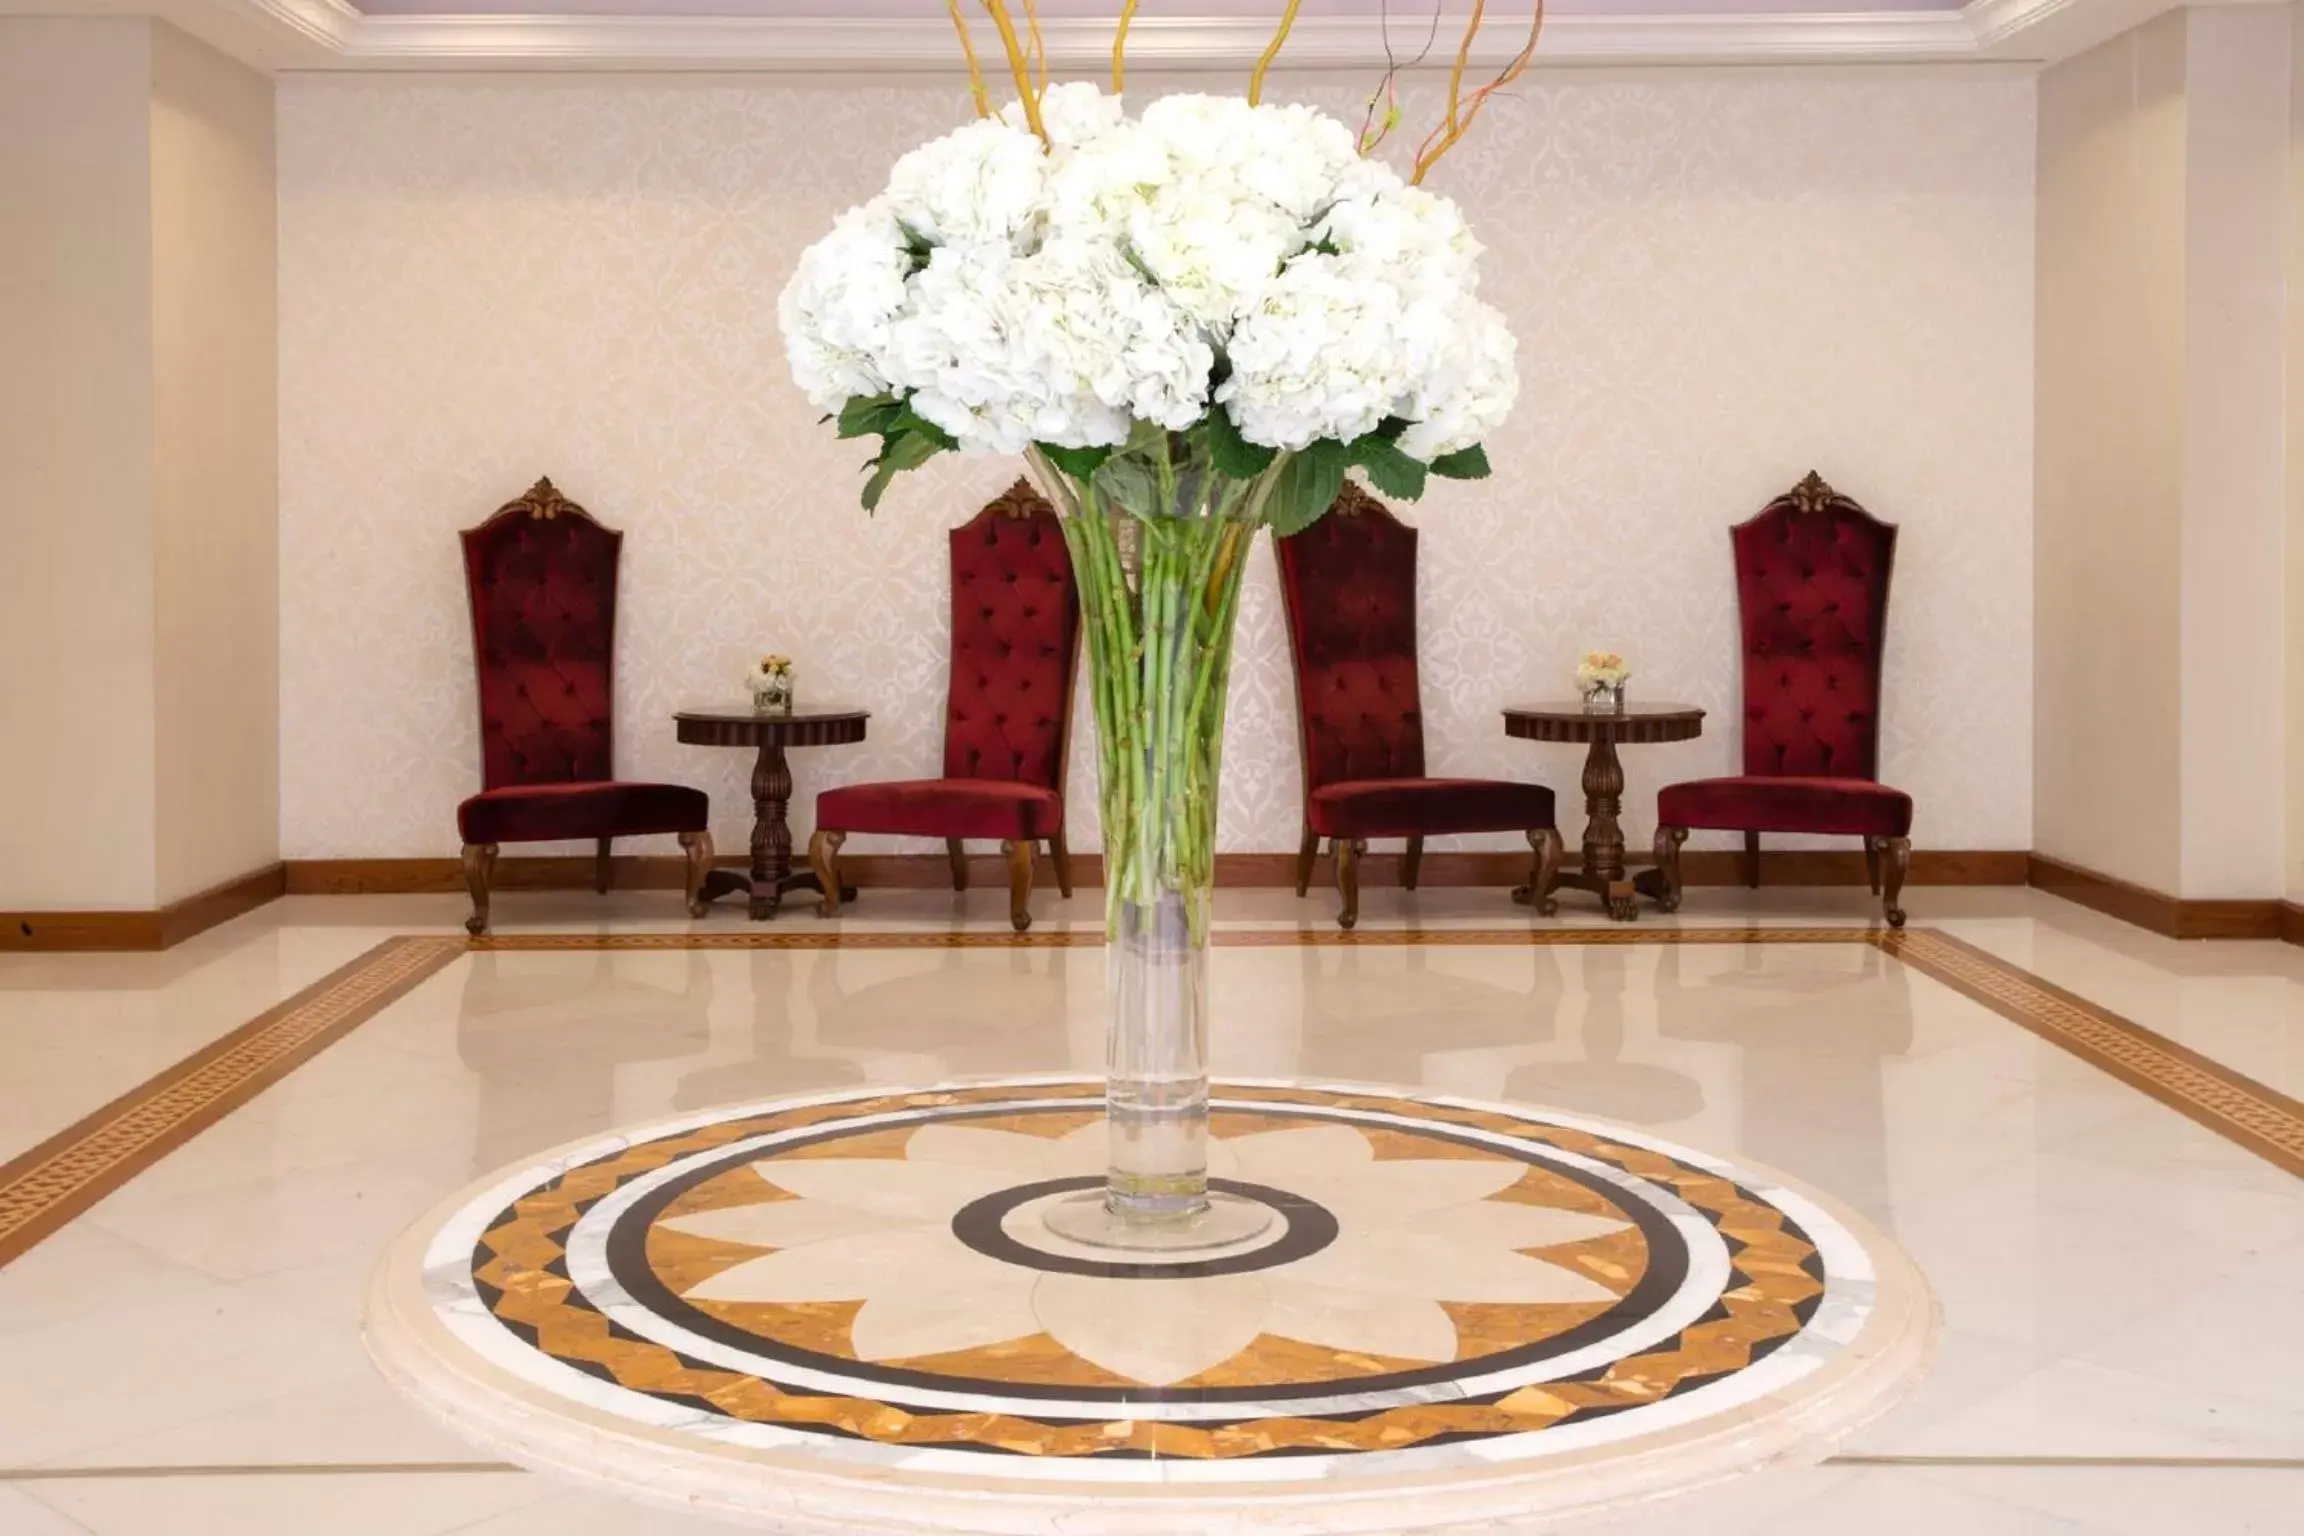 Area and facilities, Seating Area in The Regency Hotel Kuwait